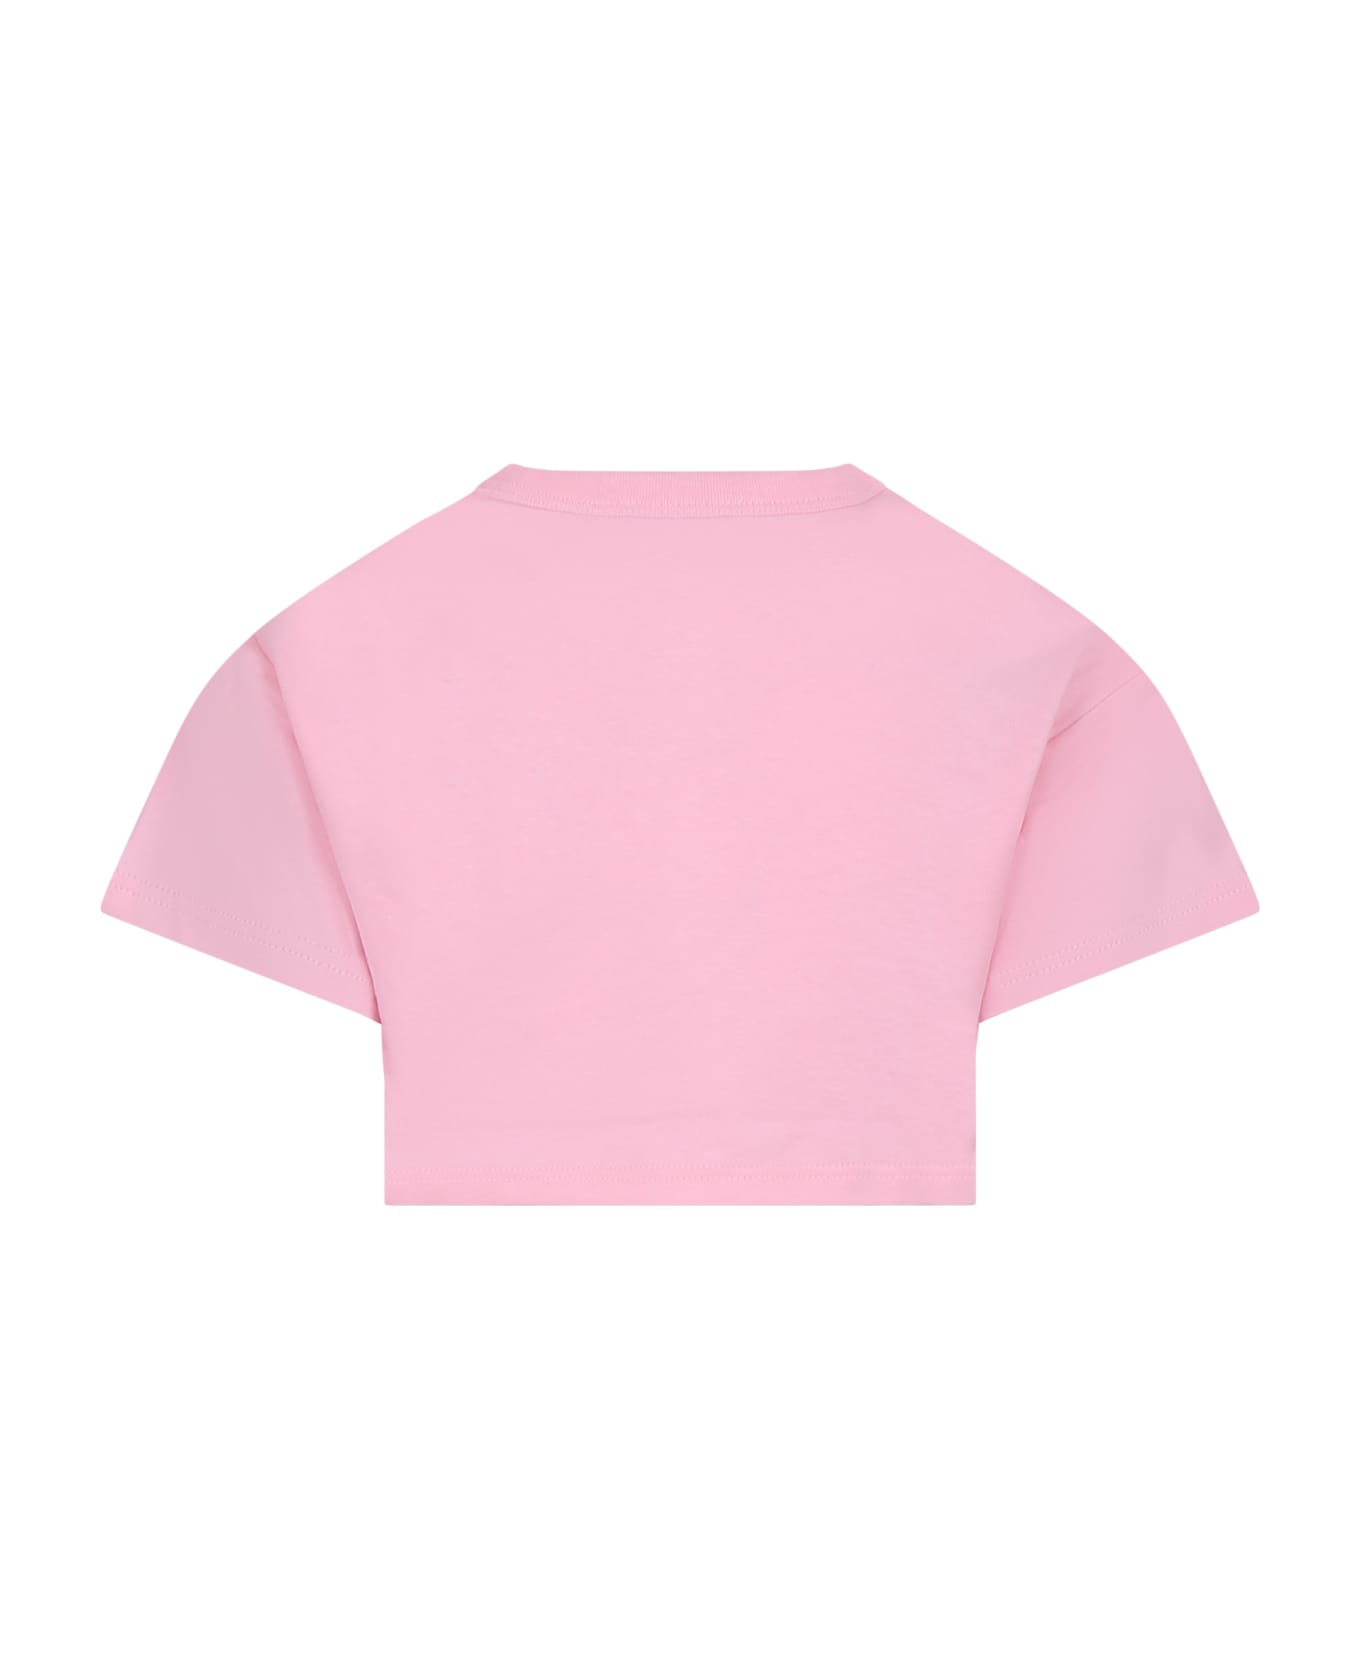 Marc Jacobs Pink Crop T-shirt For Girl - Pink